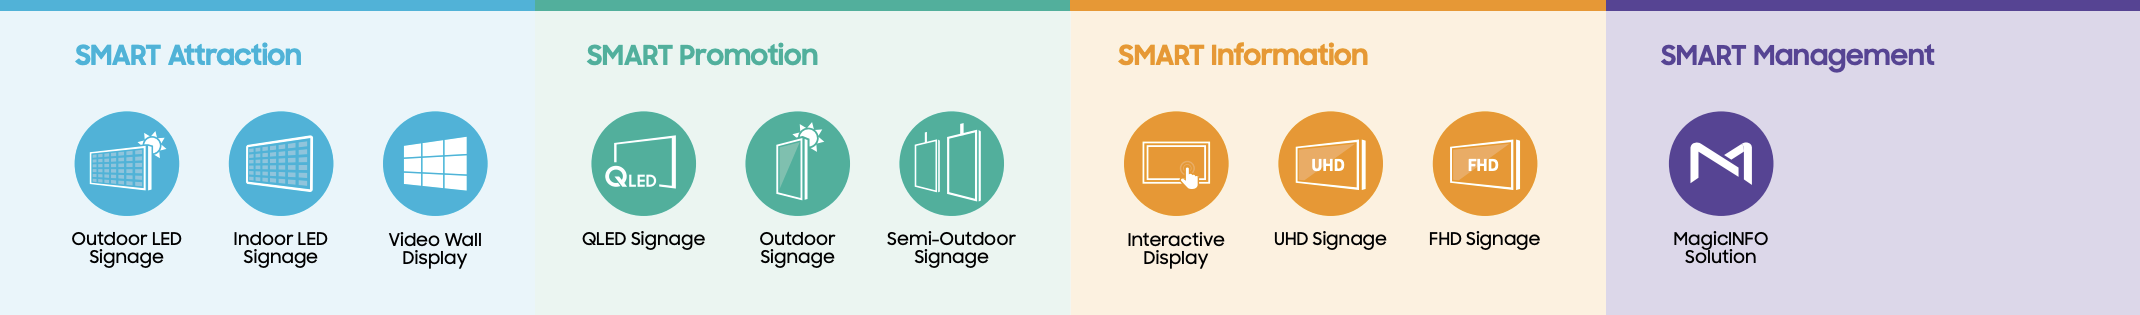 Lifestyle Displays, Identified in Four Categories of Samsung’s SMART Technology